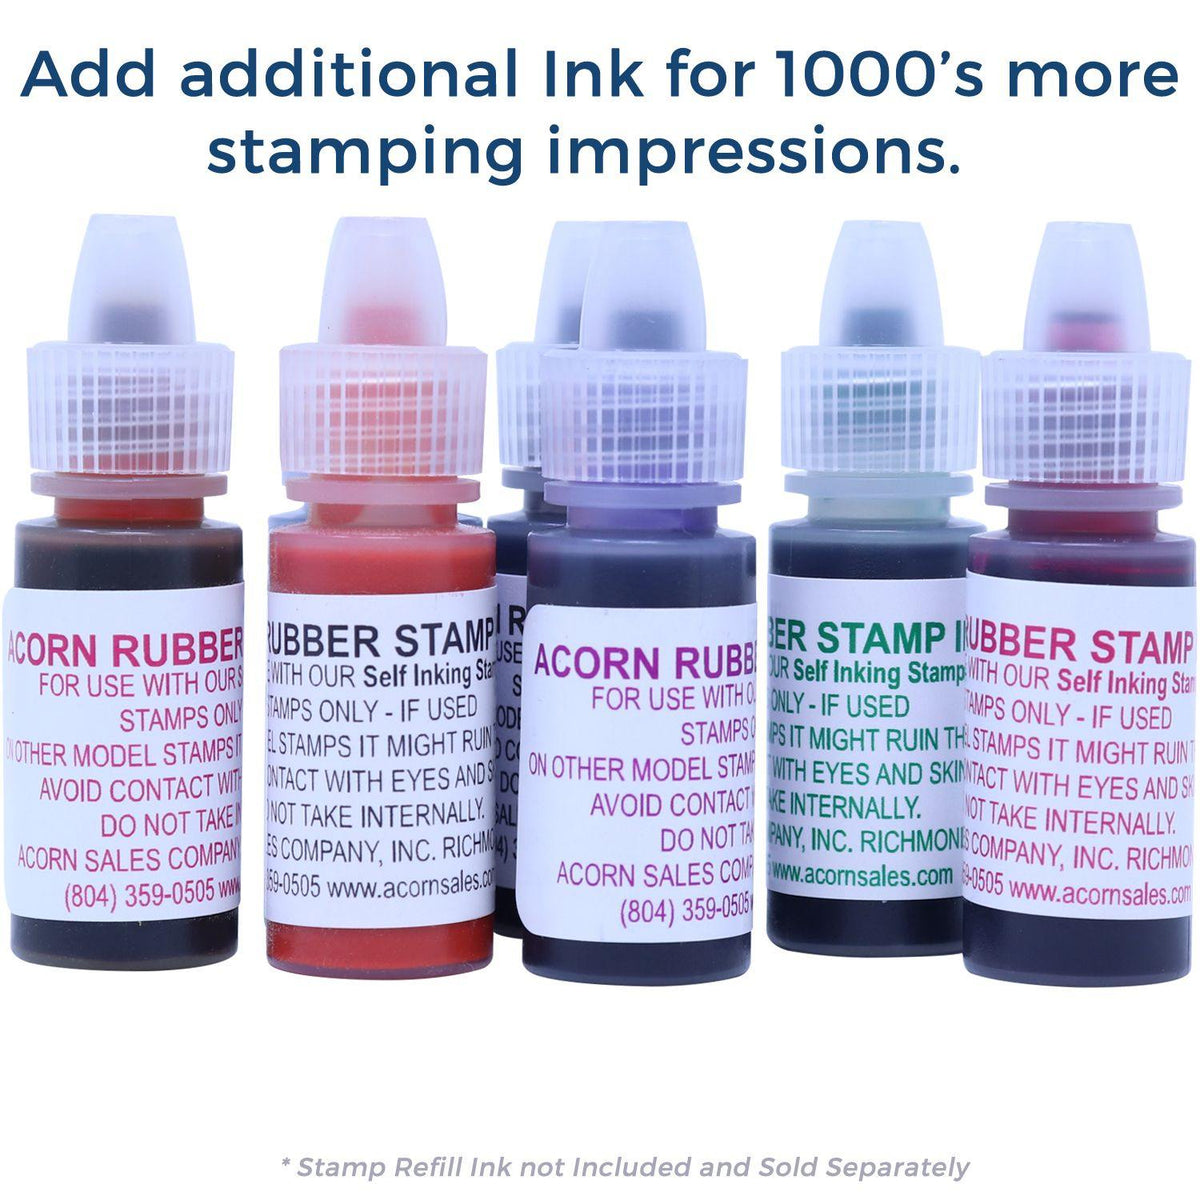 Refill Inks for Large Pre-Inked Special Handling Stamp Available